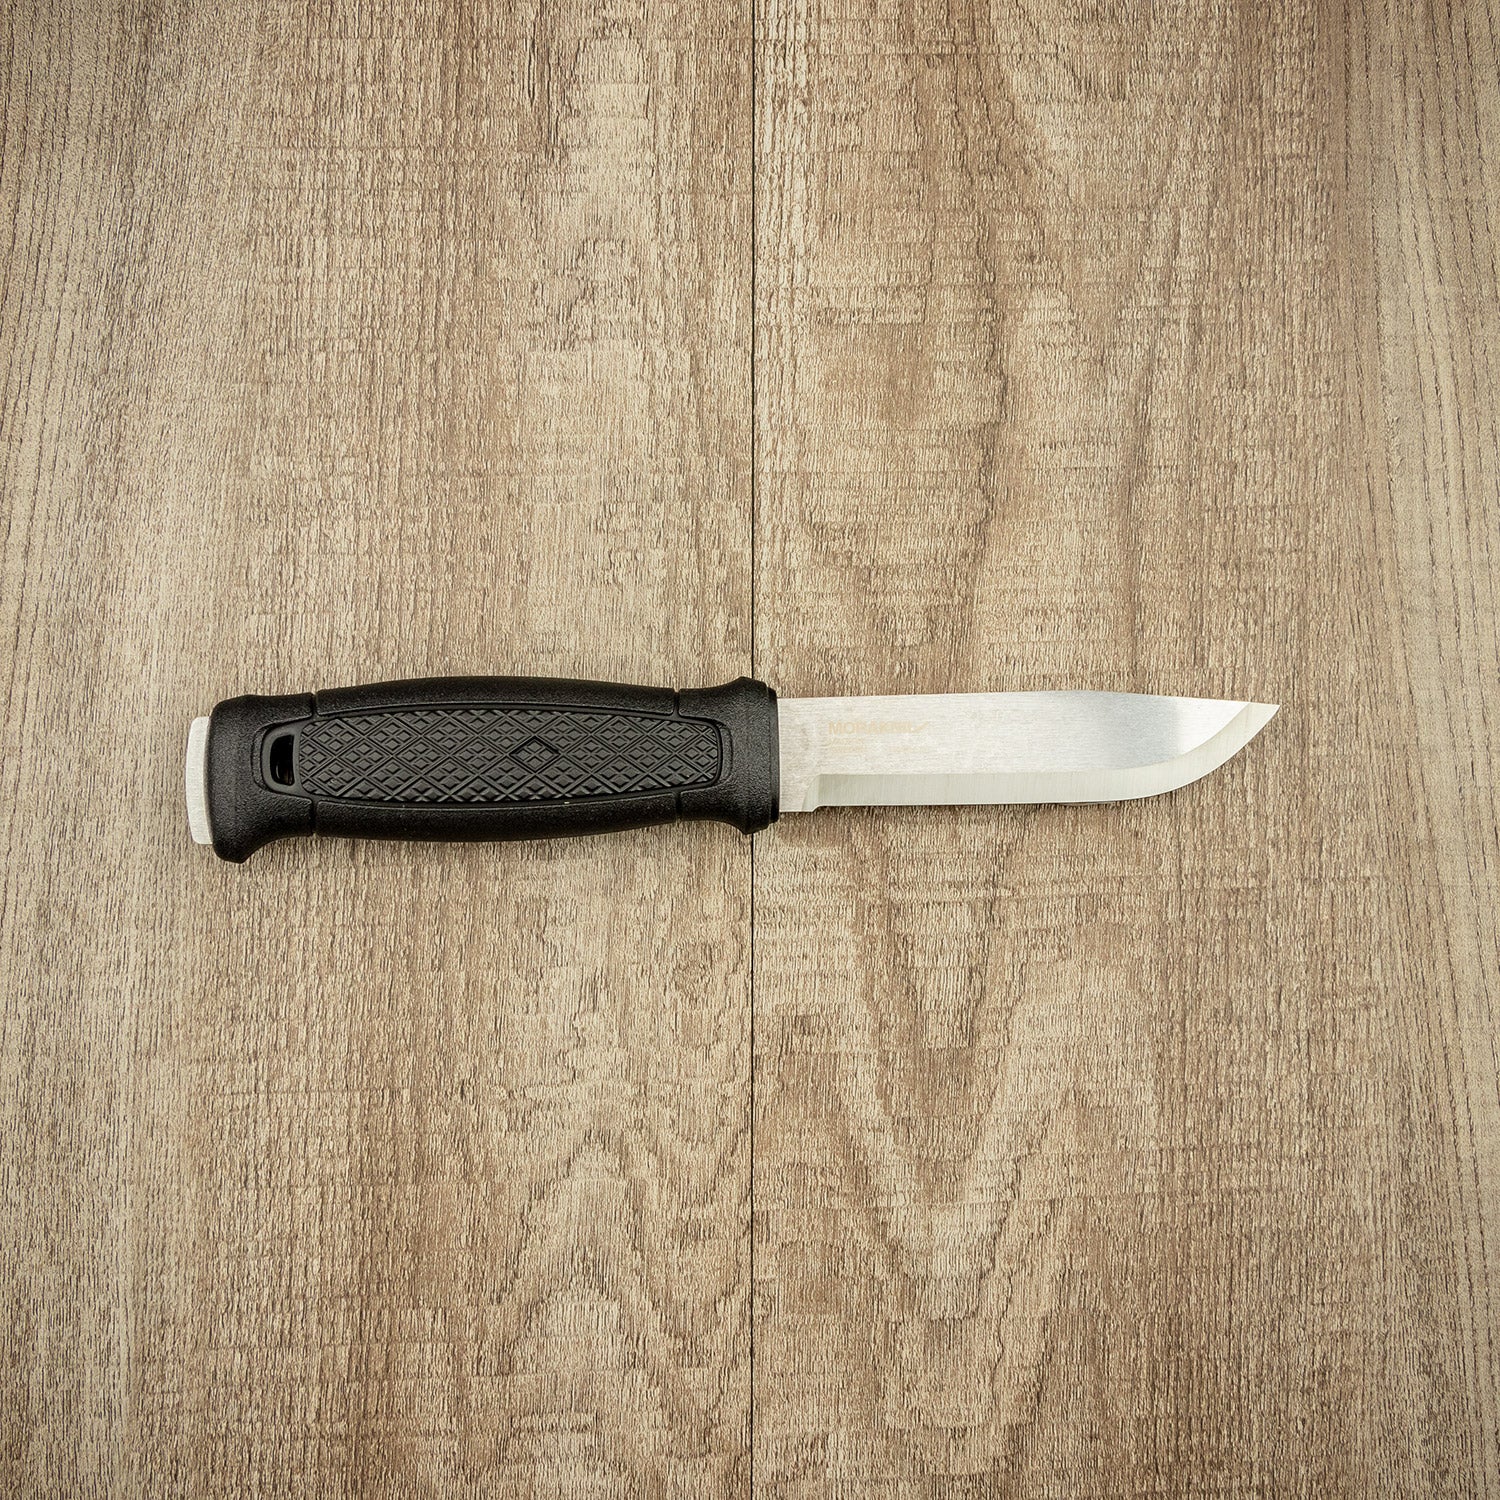 Morakniv Garberg knife review - This is a full tang fixed blade